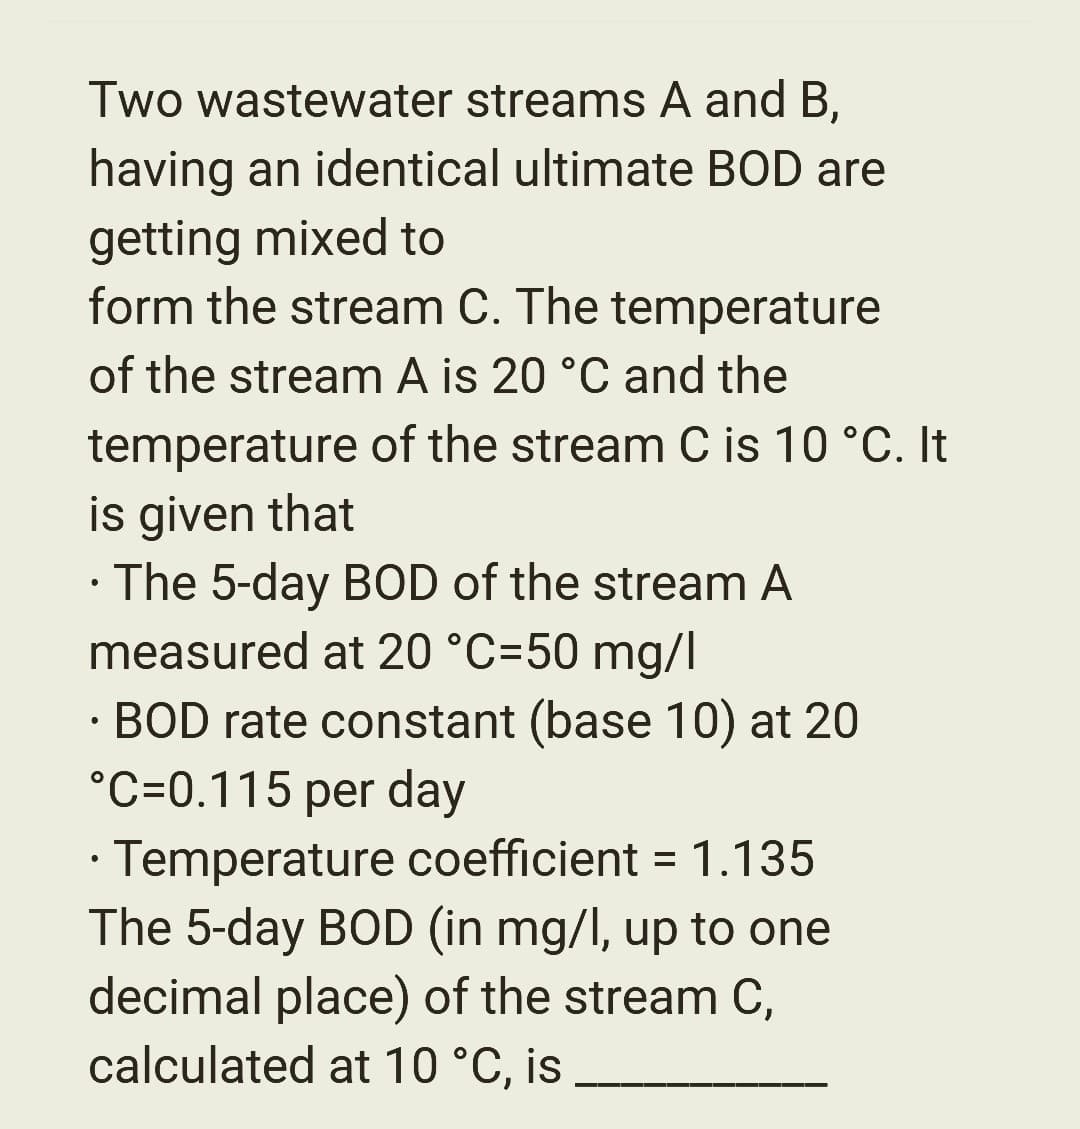 Two wastewater streams A and B,
having an identical ultimate BOD are
getting mixed to
form the stream C. The temperature
of the stream A is 20 °C and the
temperature of the stream C is 10 °C. It
is given that
• The 5-day BOD of the stream A
measured at 20 °C=50 mg/l
• BOD rate constant (base 10) at 20
°C-0.115 per day
Temperature coefficient = 1.135
The 5-day BOD (in mg/l, up to one
decimal place) of the stream C,
calculated at 10 °C, is
●